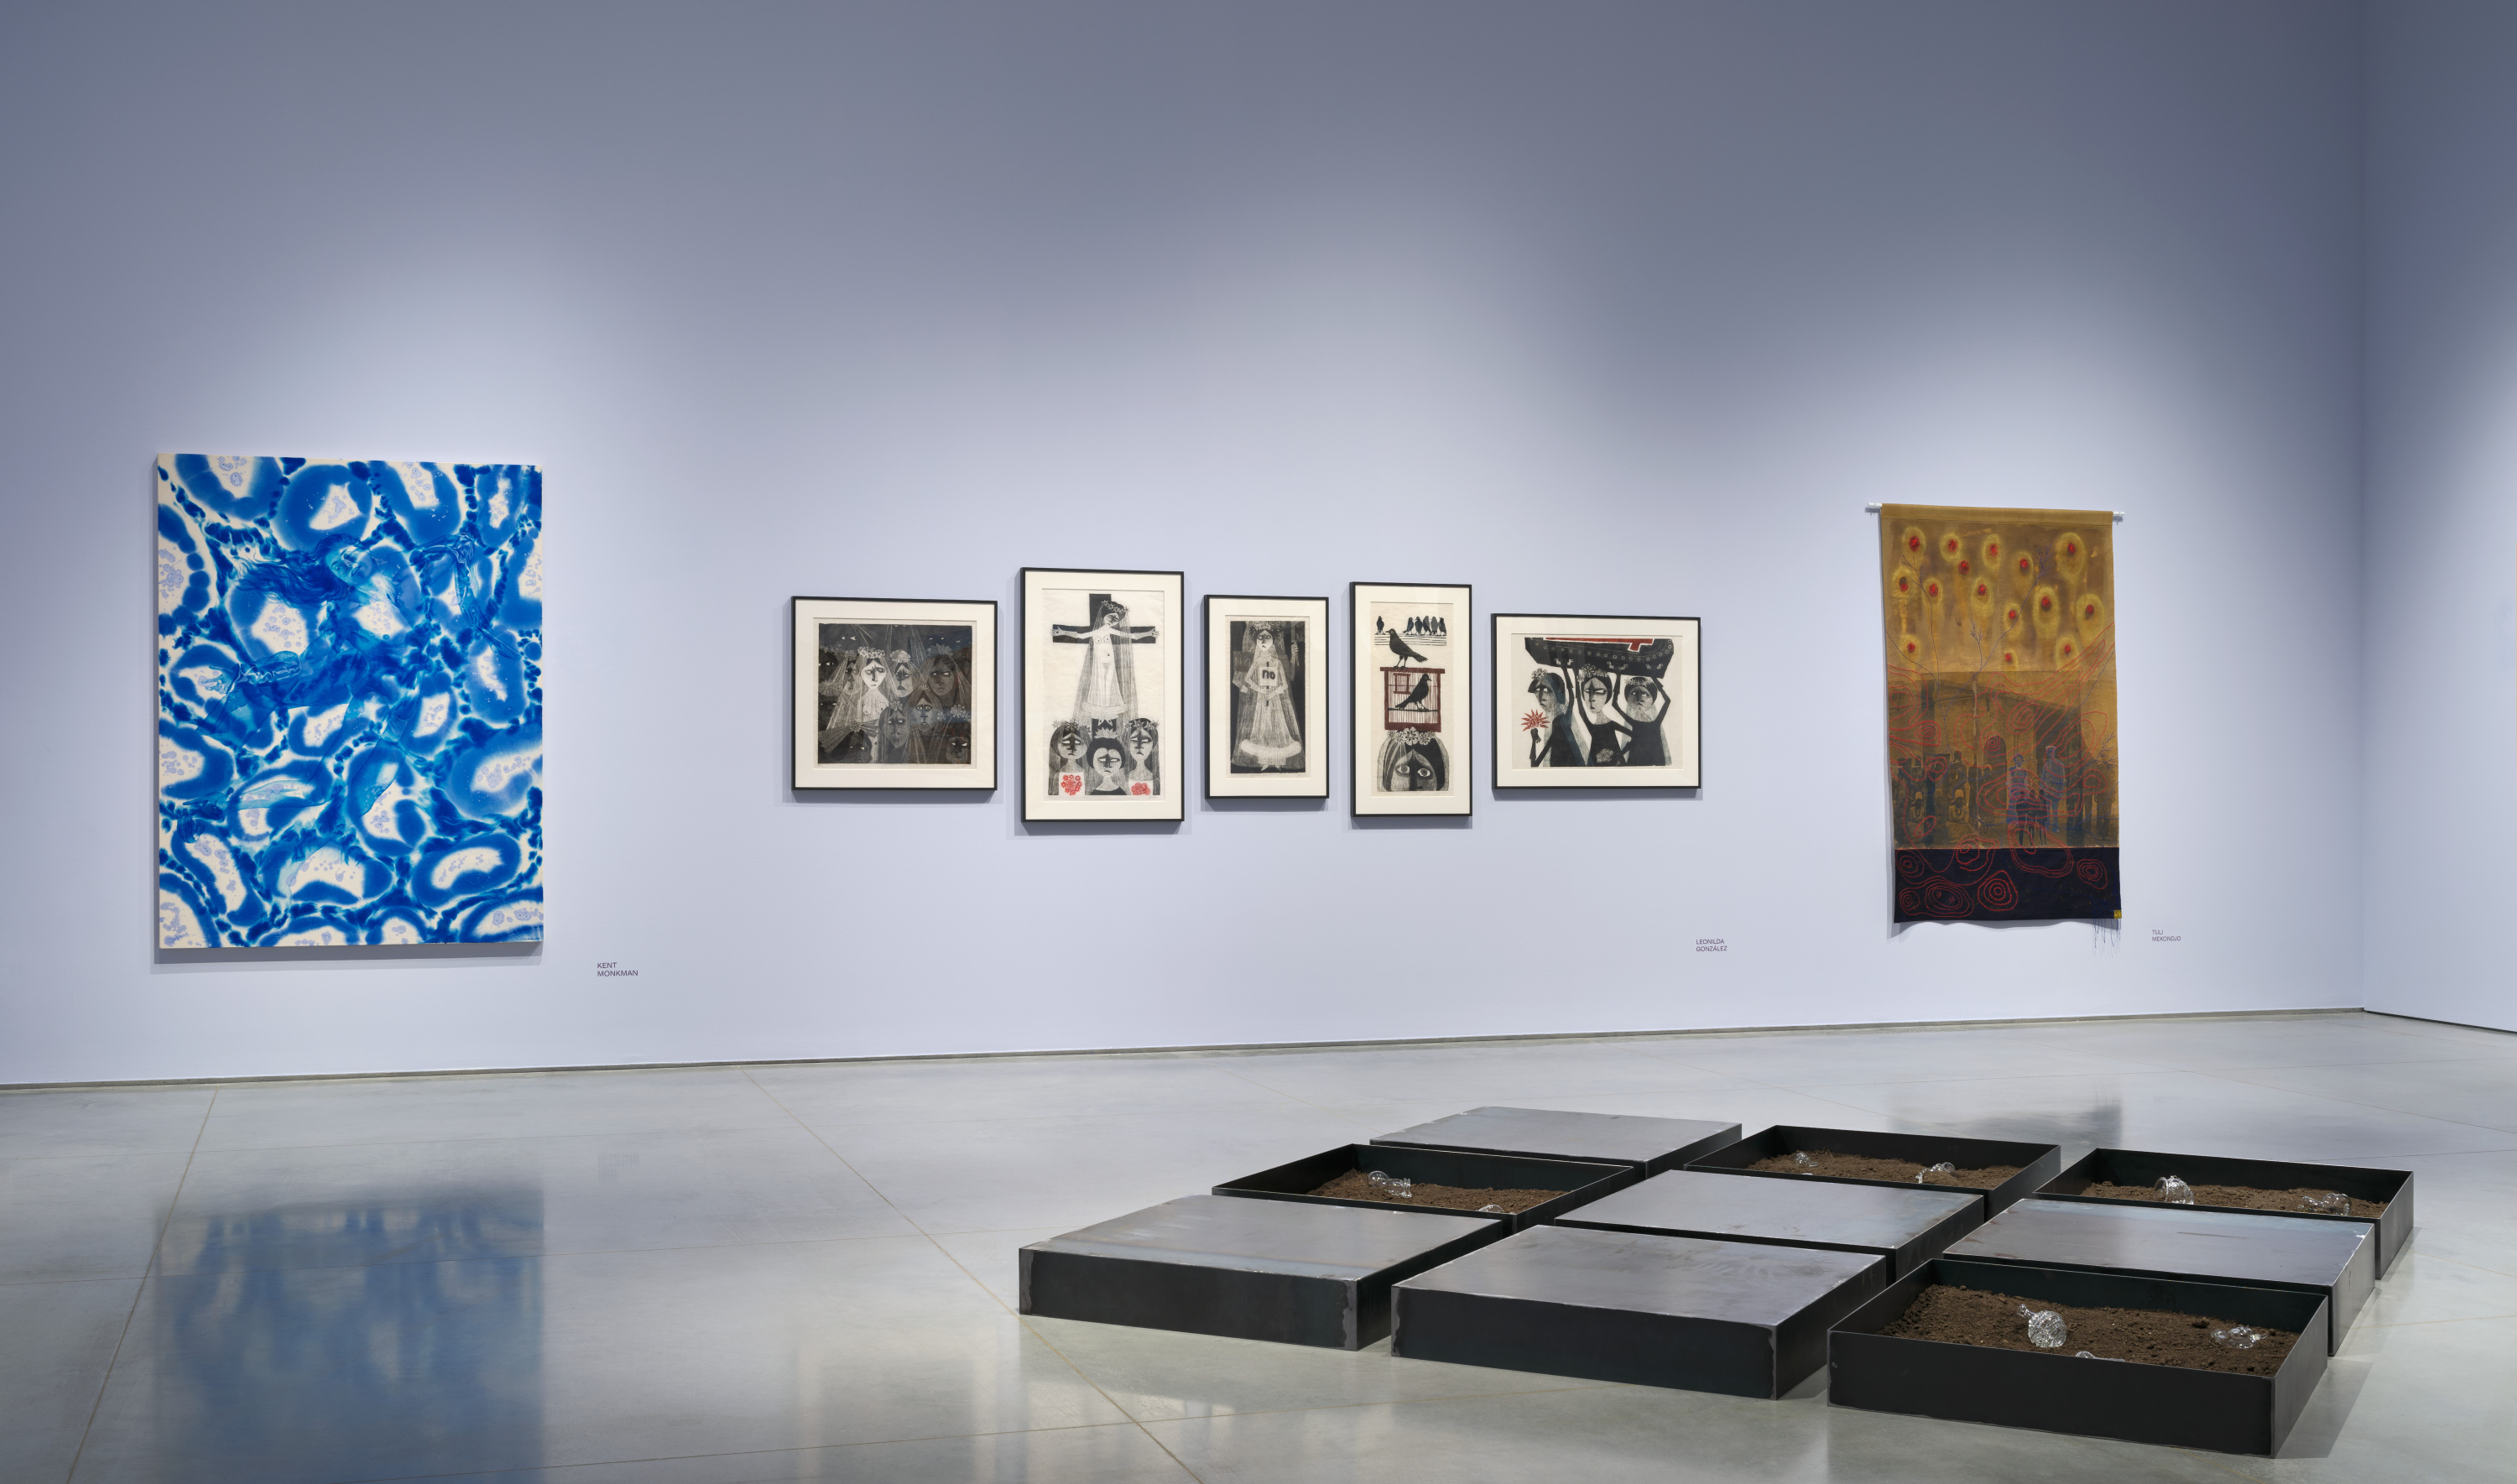 Gallery interior with light lavender walls and a gray floor. On the floor is a three by three steel-tray installation. On the wall are several artworks in a line. From left to right, one blue and white patterned painting, then five framed woodcuts, then a brown canvas with various painted and embroidered elements.